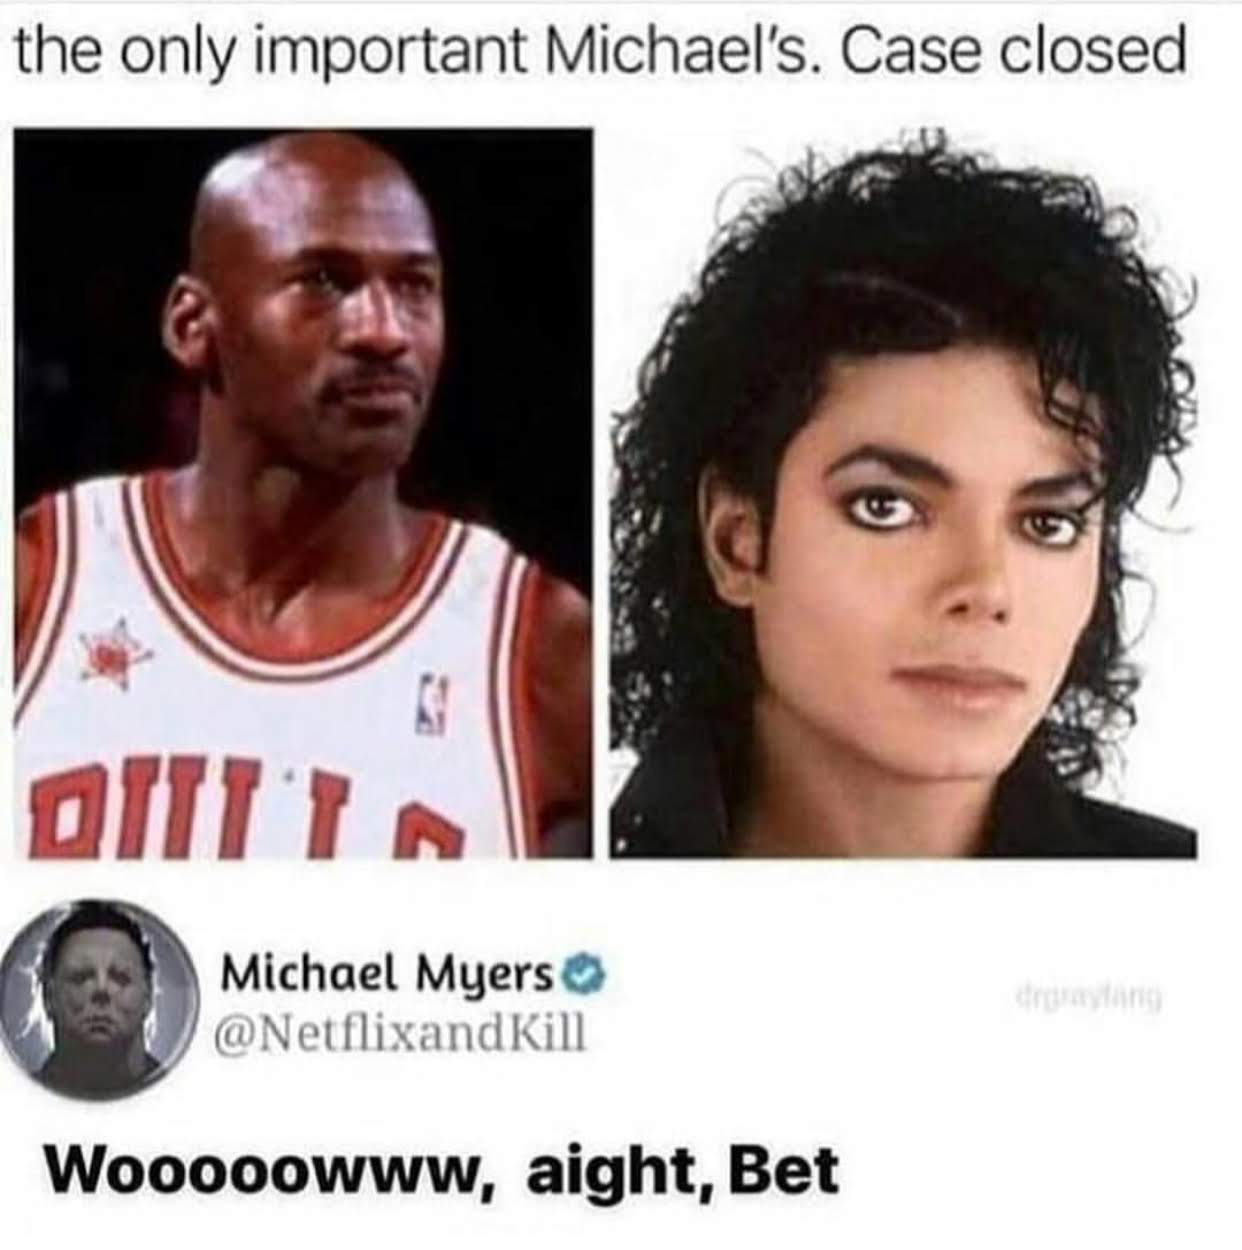 memes - only important michaels meme - the only important Michael's. Case closed Qilia Michael Myers Wooooowww, aight, Bet